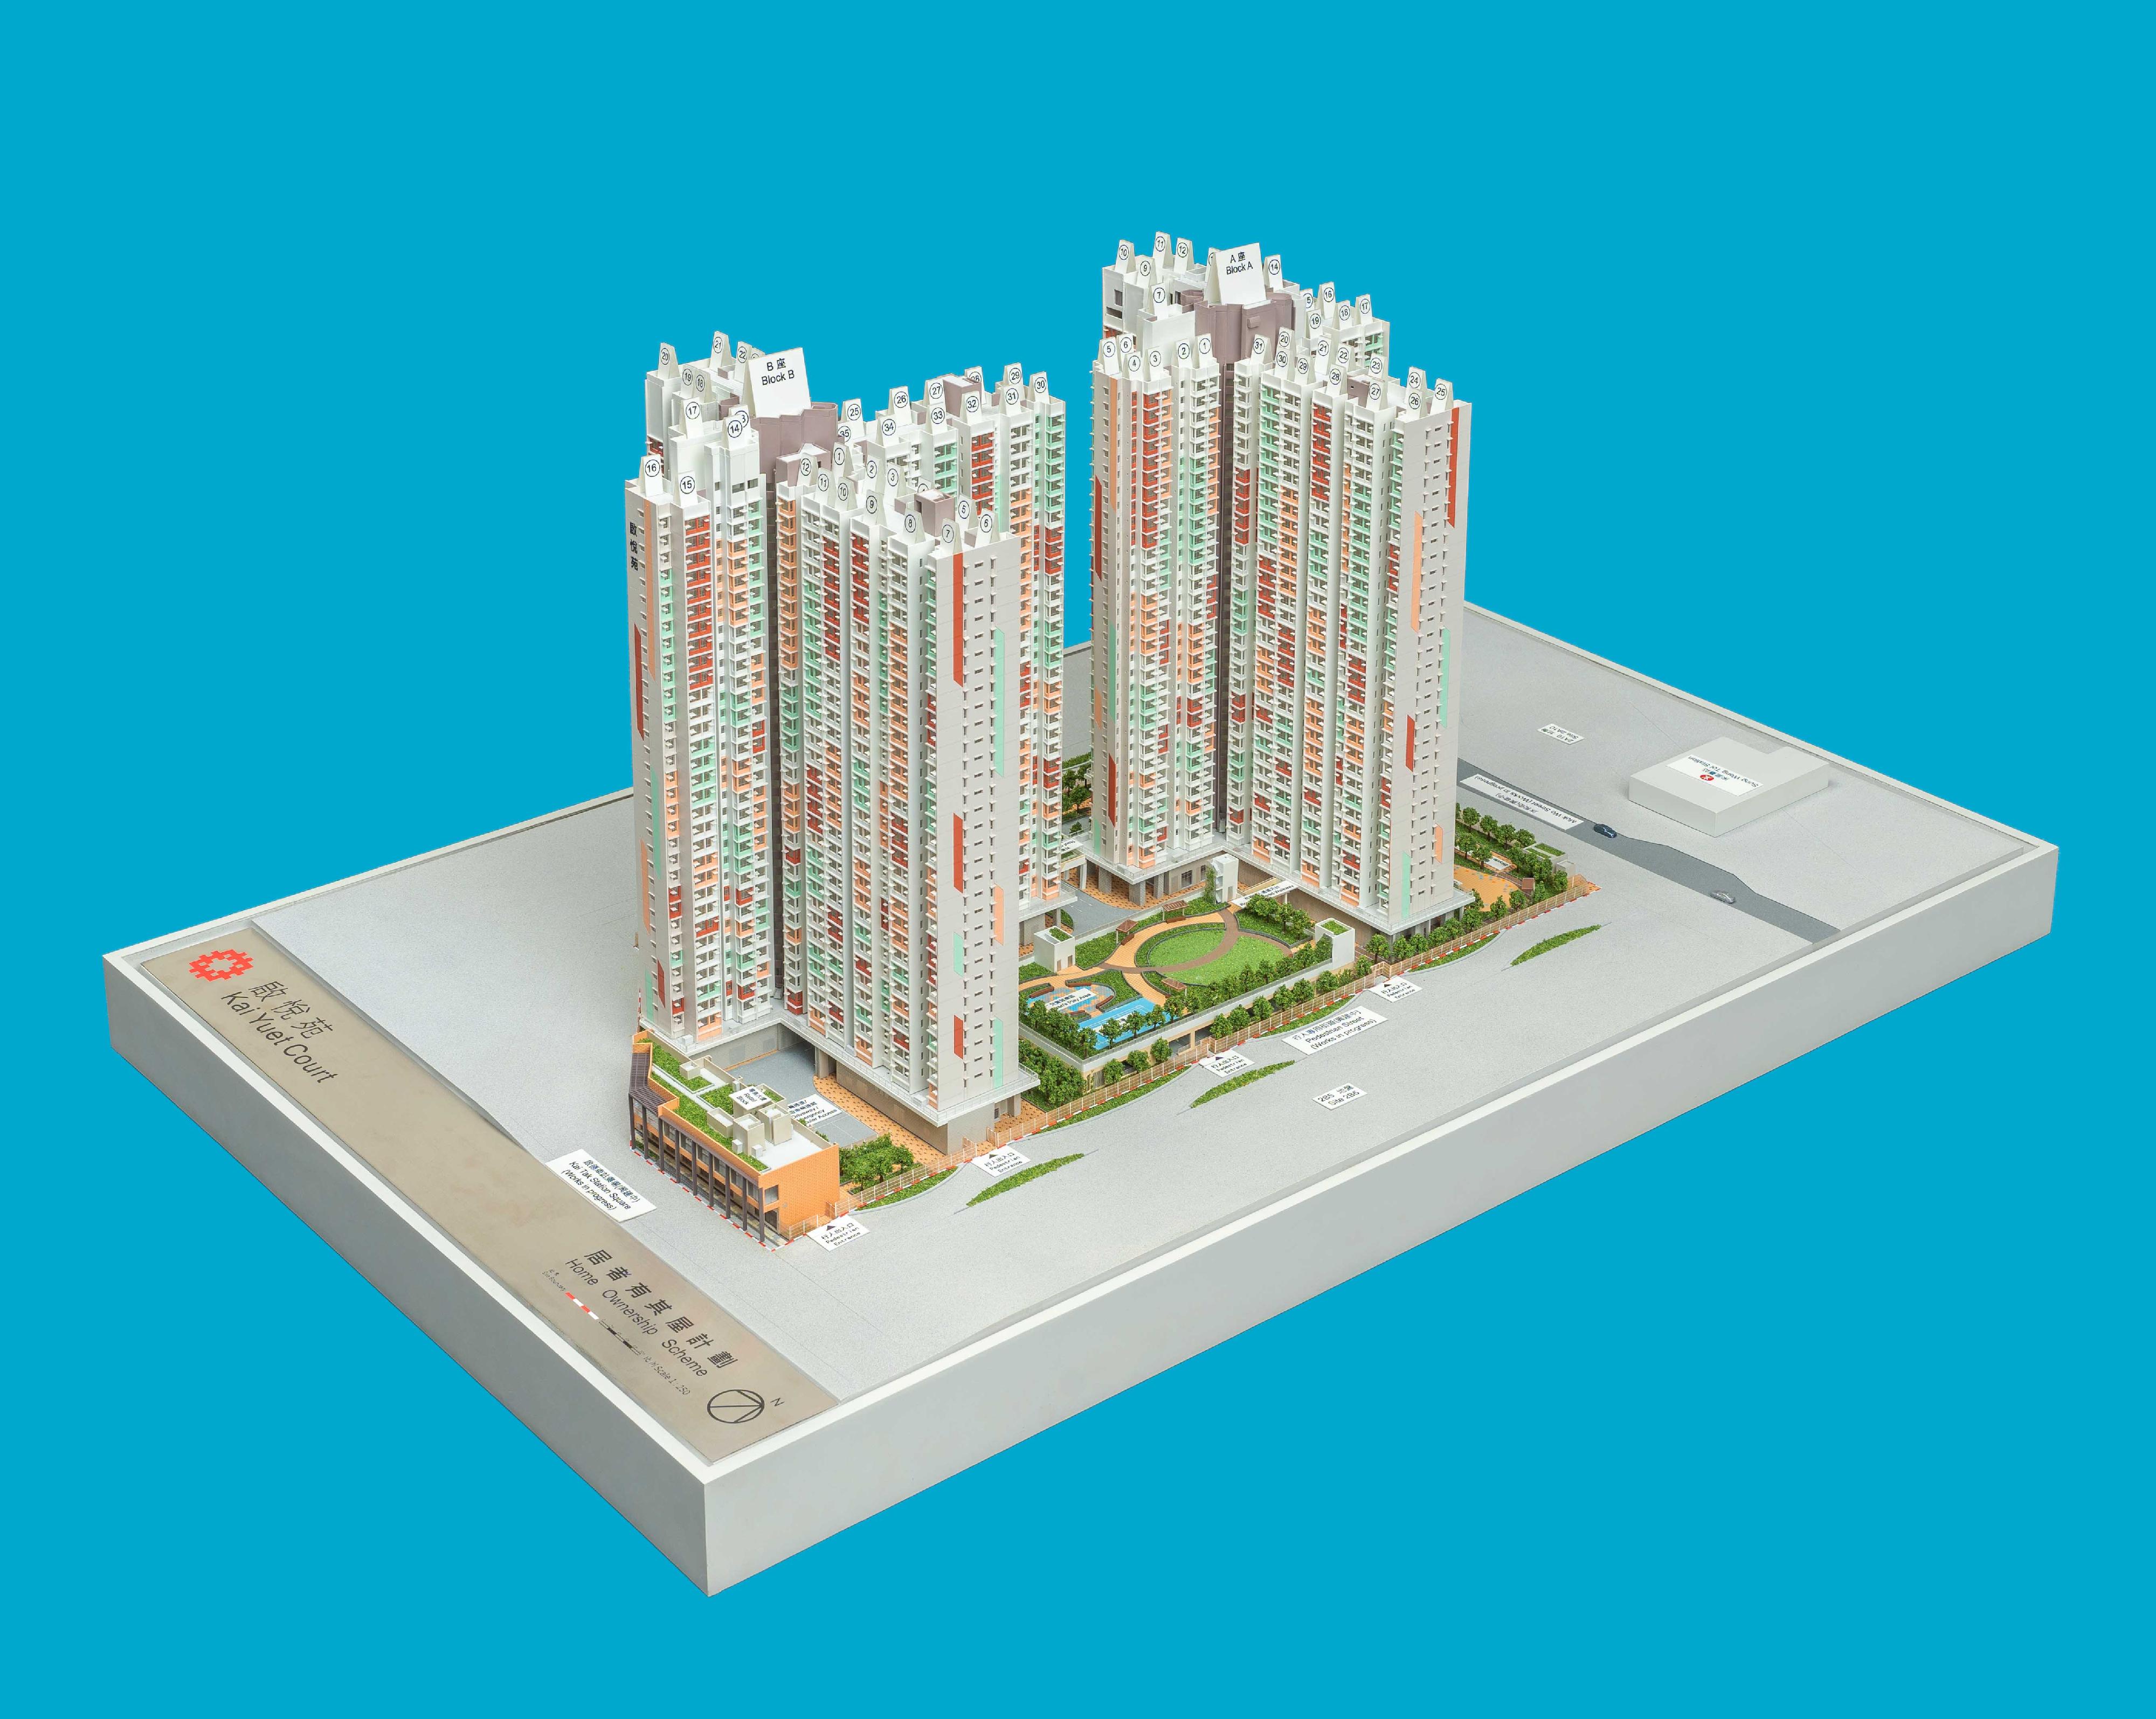 Applications for purchase under the Sale of Home Ownership Scheme Flats 2023 will start on July 31. Photo shows a model of Kai Yuet Court, a new development project under the scheme.






